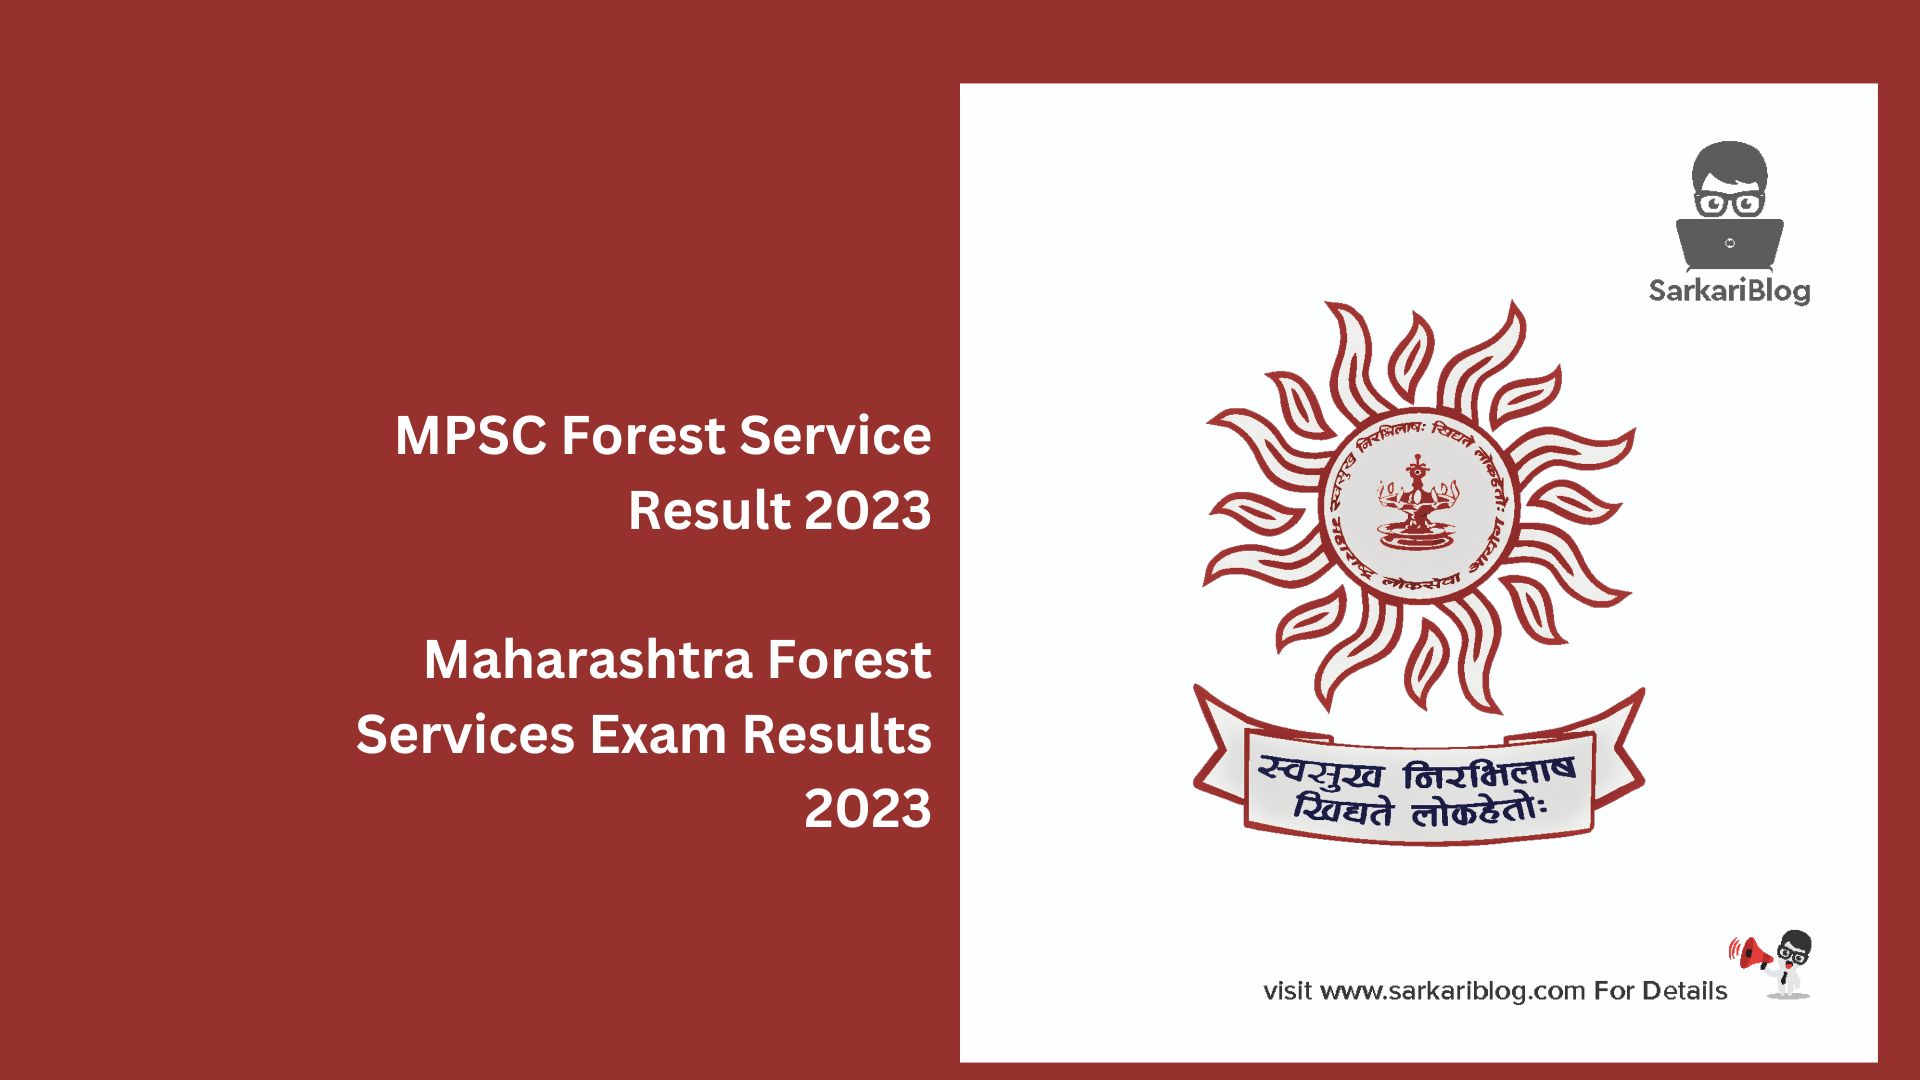 MPSC Forest Service Result 2023